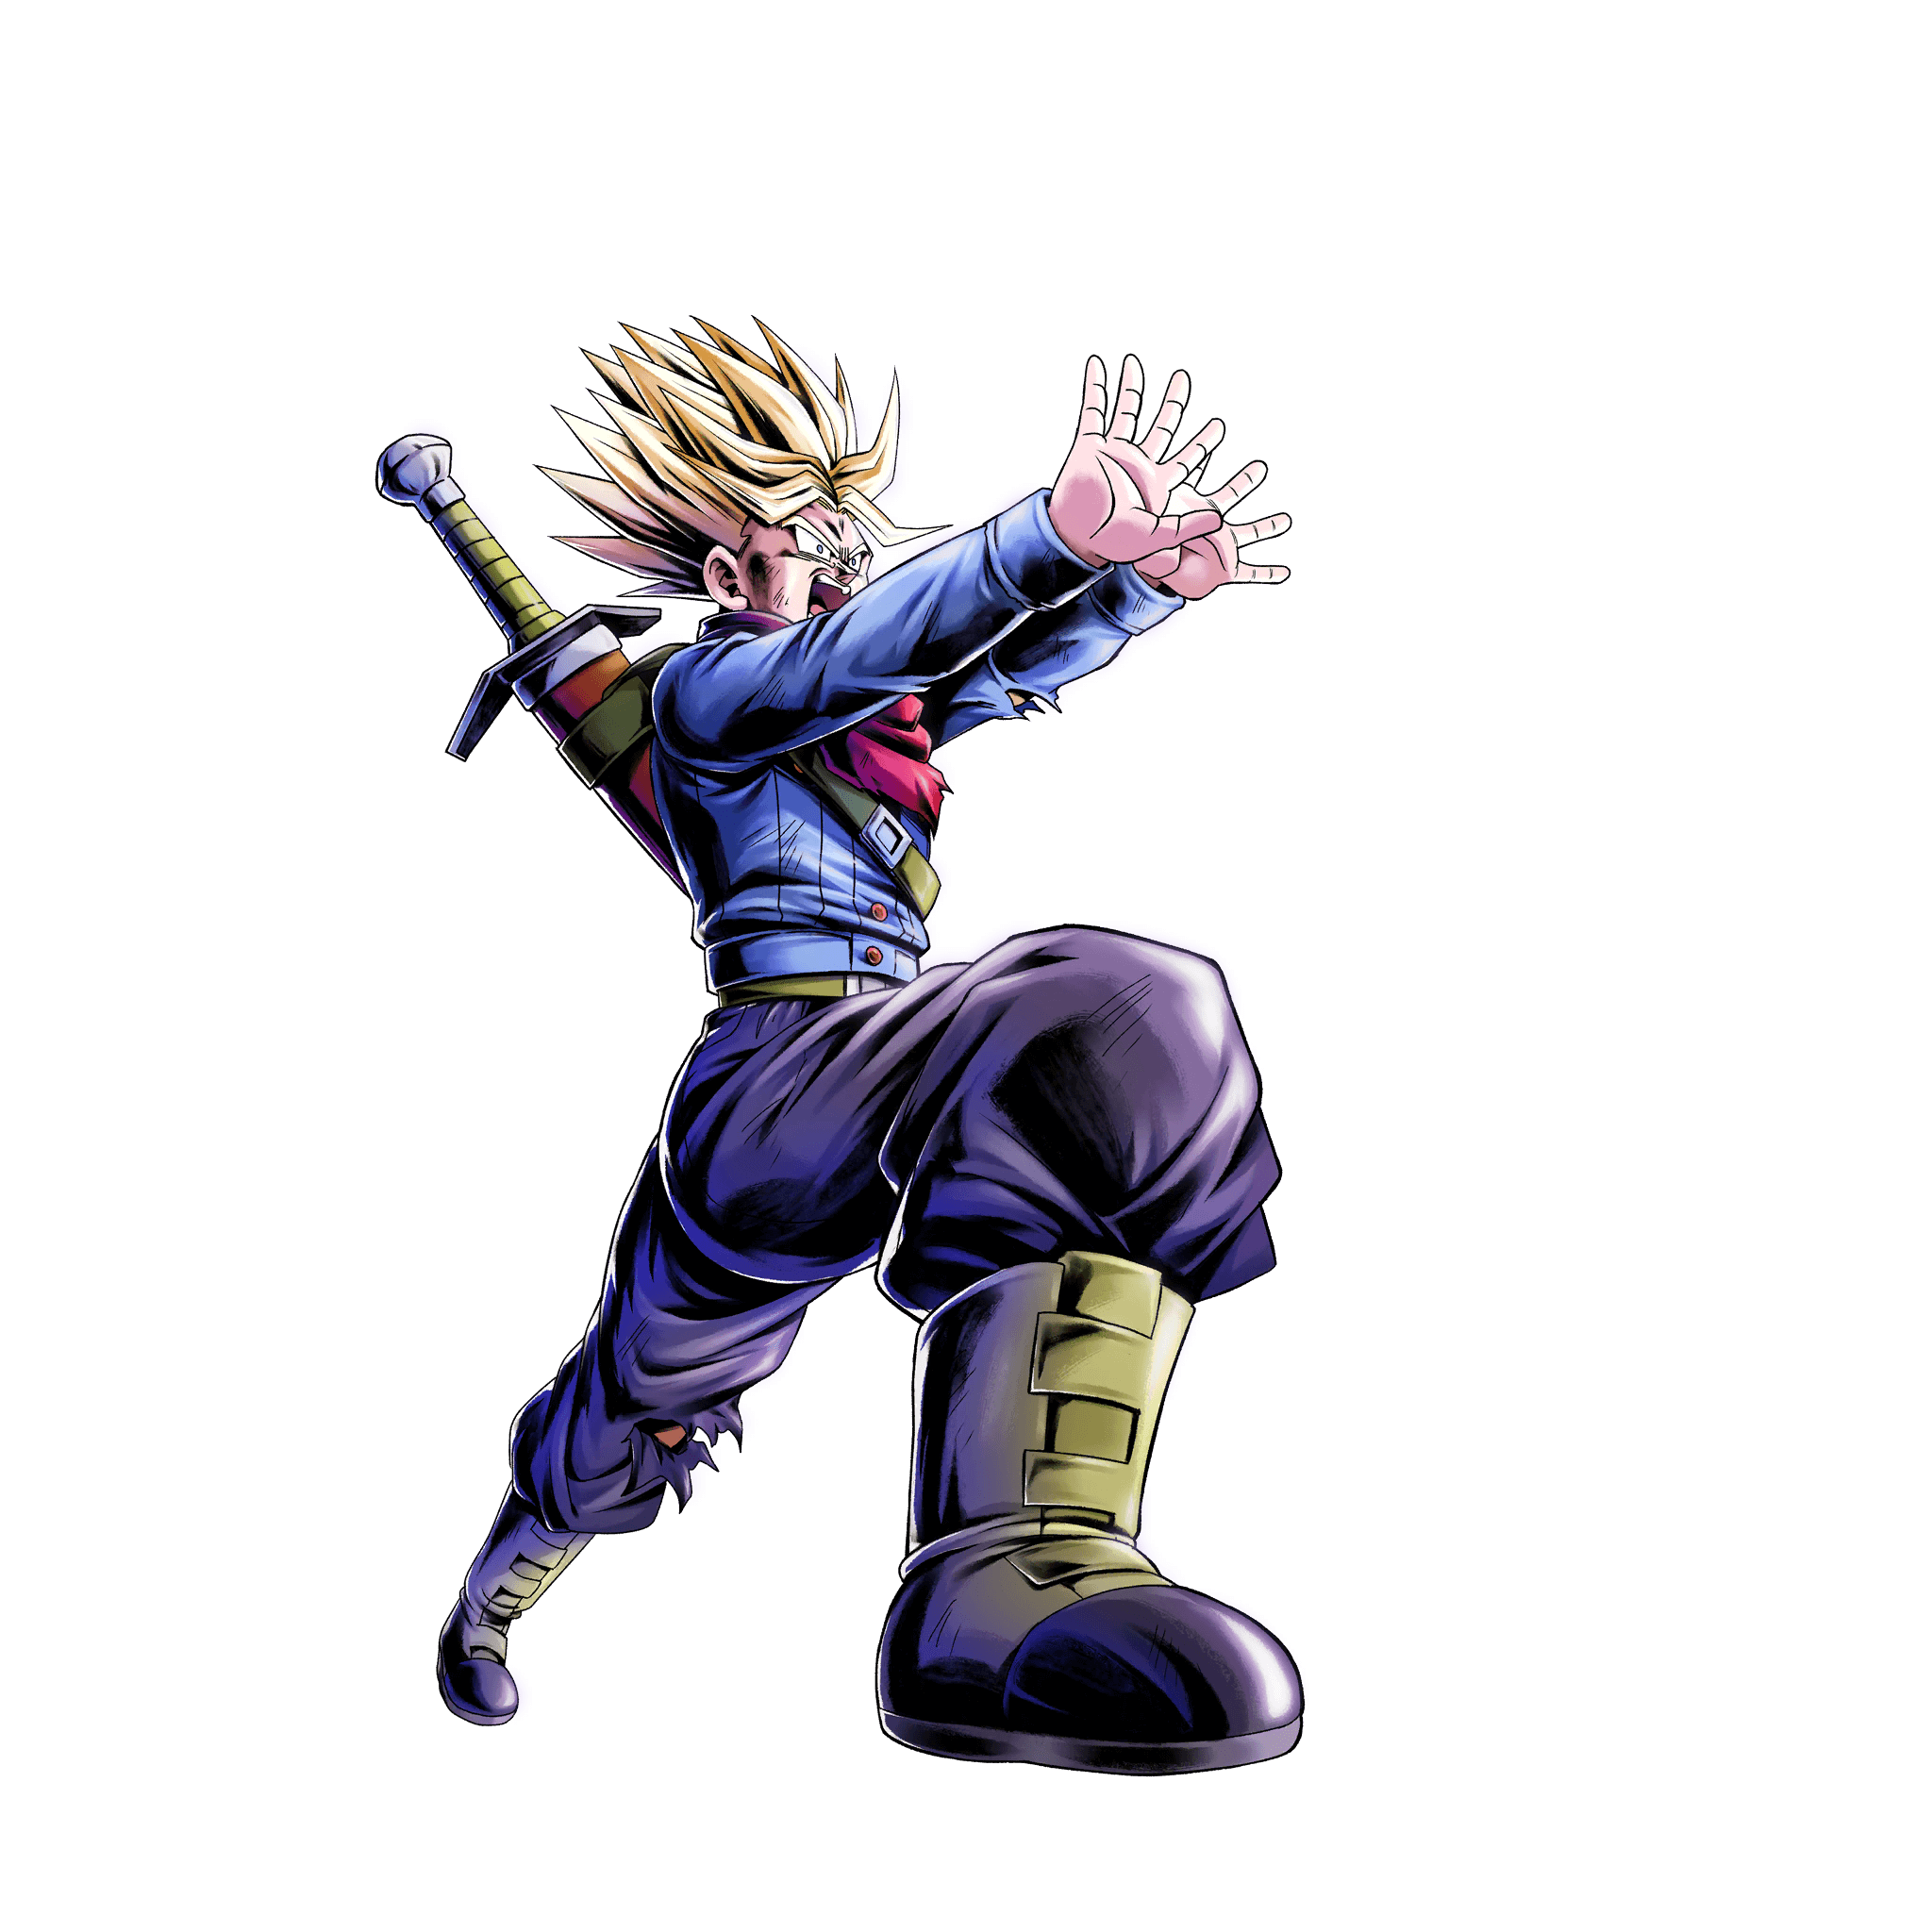 Event-Exclusive Super Saiyan 2 Trunks (Adult) Is Coming